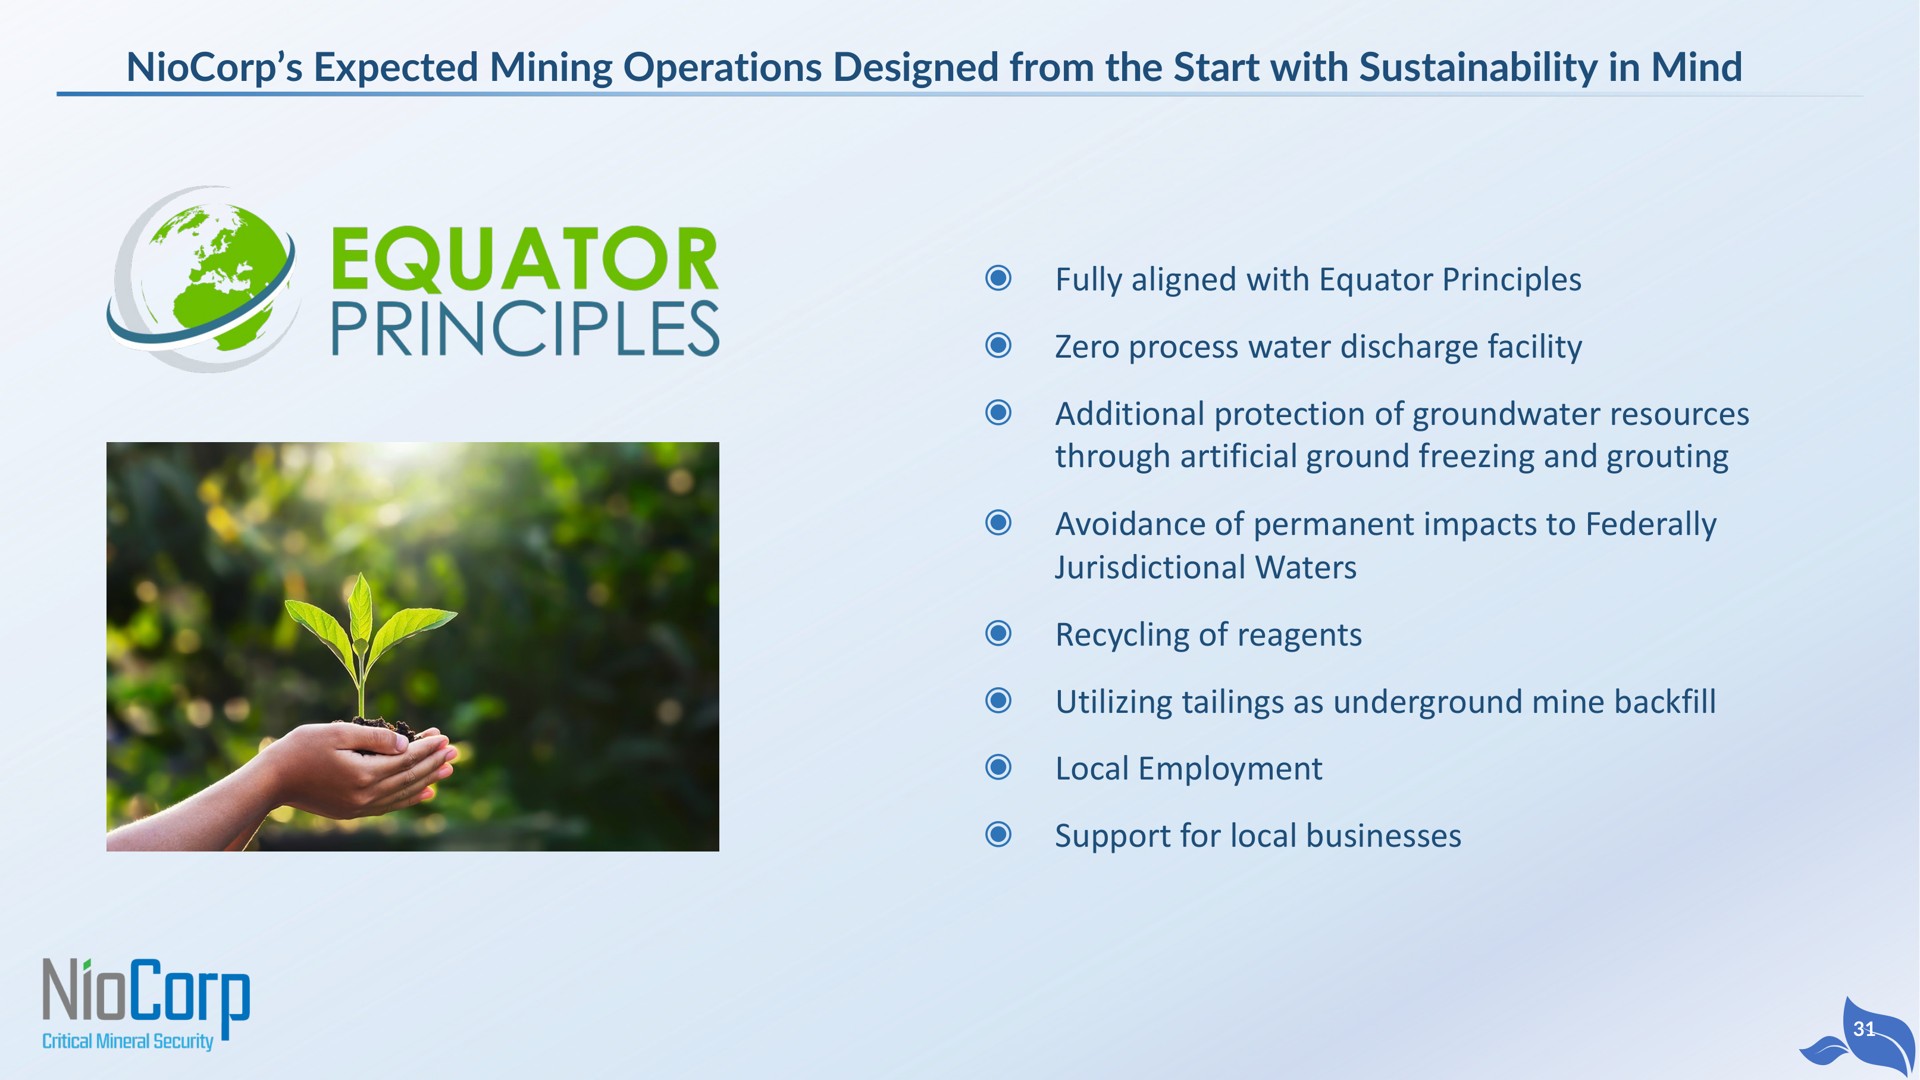 expected mining operations designed from the start with in mind fully aligned with equator principles zero process water discharge facility additional protection of resources through artificial ground freezing and grouting avoidance of permanent impacts to federally jurisdictional waters recycling of reagents utilizing tailings as underground mine backfill local employment support for local businesses | NioCorp